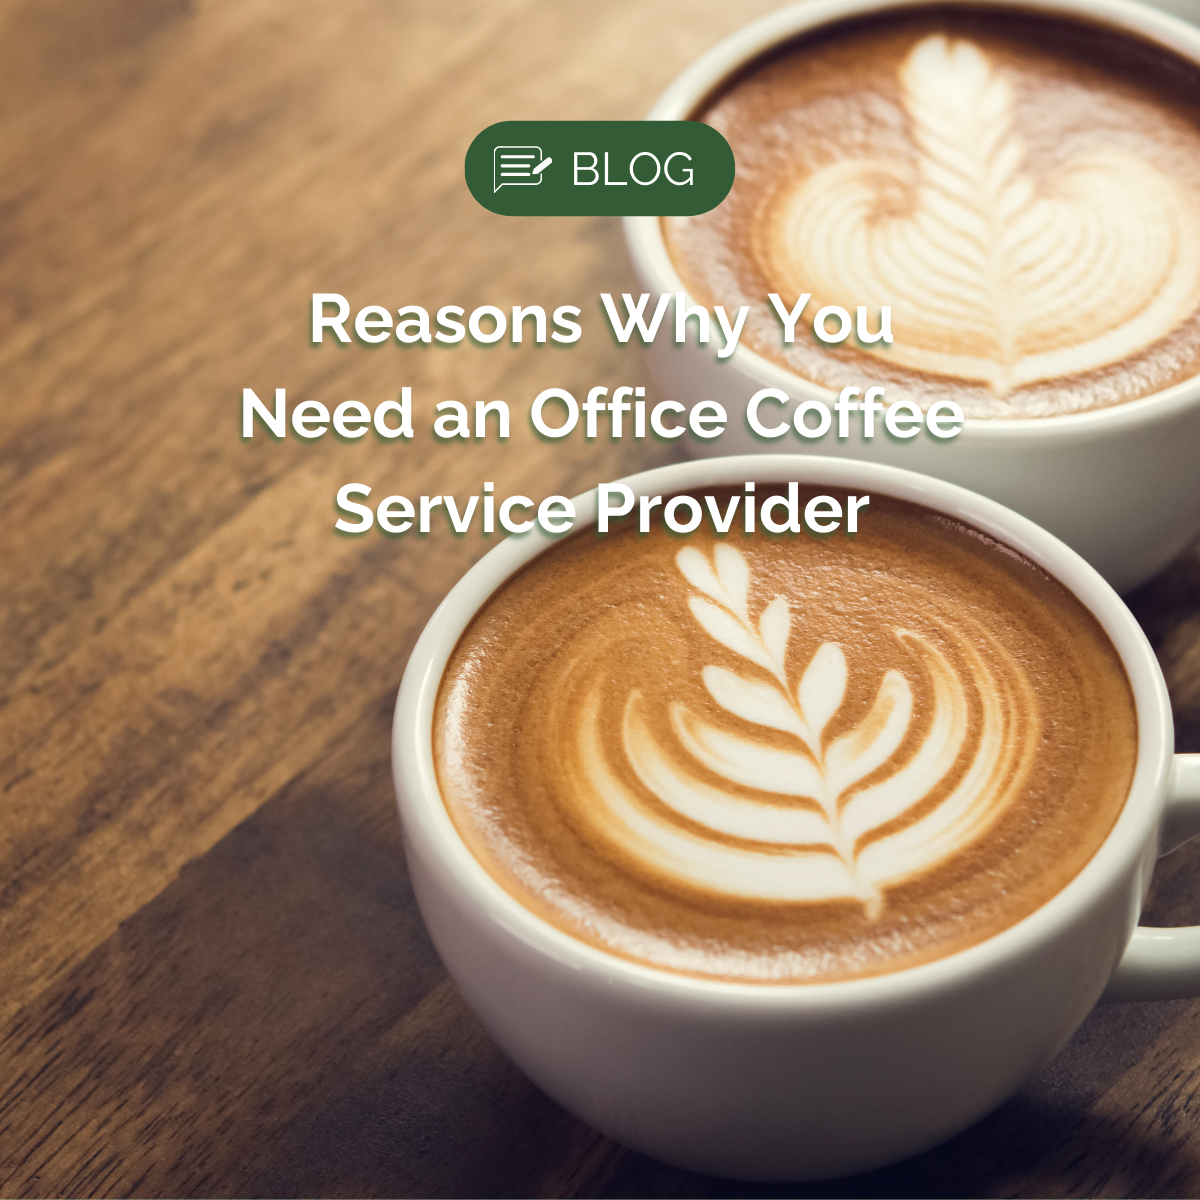 Reasons why you need an office coffee service provider